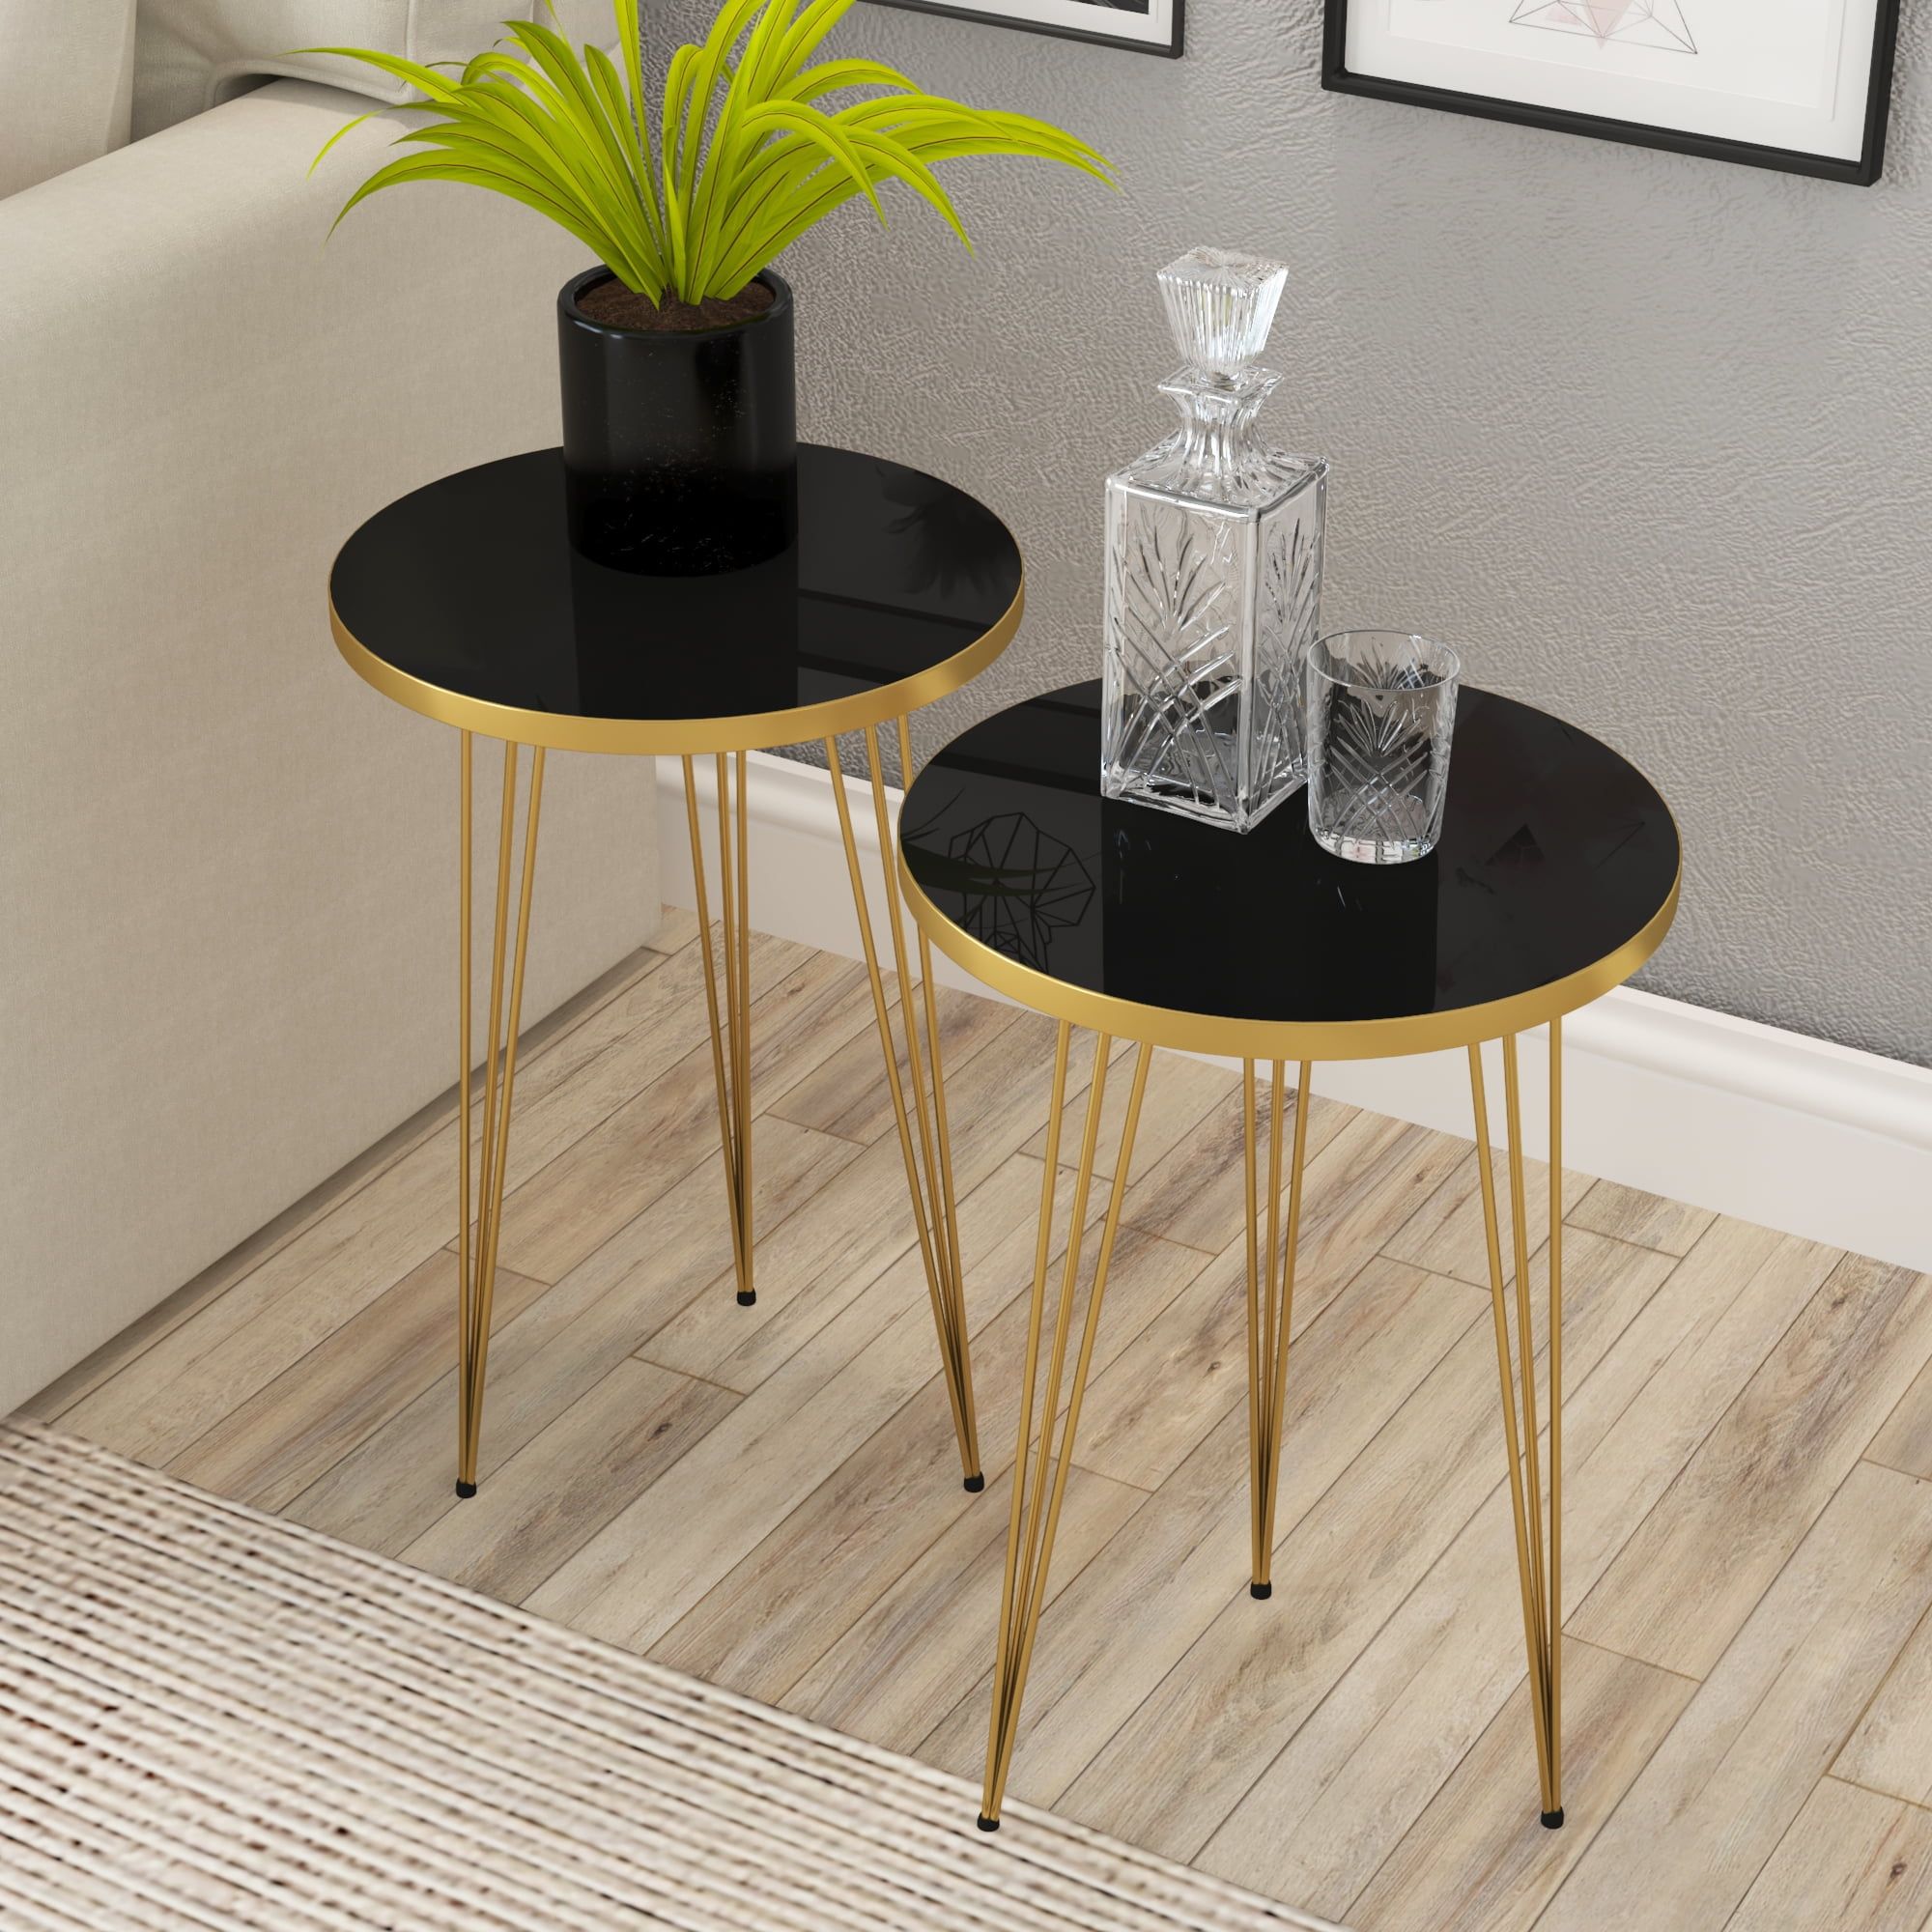 Pak Home Set Of 2 End Table – Round Wood Sofa Side Tables For Small Spaces,  Nightstand Bedside Table With Metal Legs For Bedroom, Living Room, Office,  Balcony (black High Gloss) – Walmart With Metal Side Tables For Living Spaces (View 3 of 15)